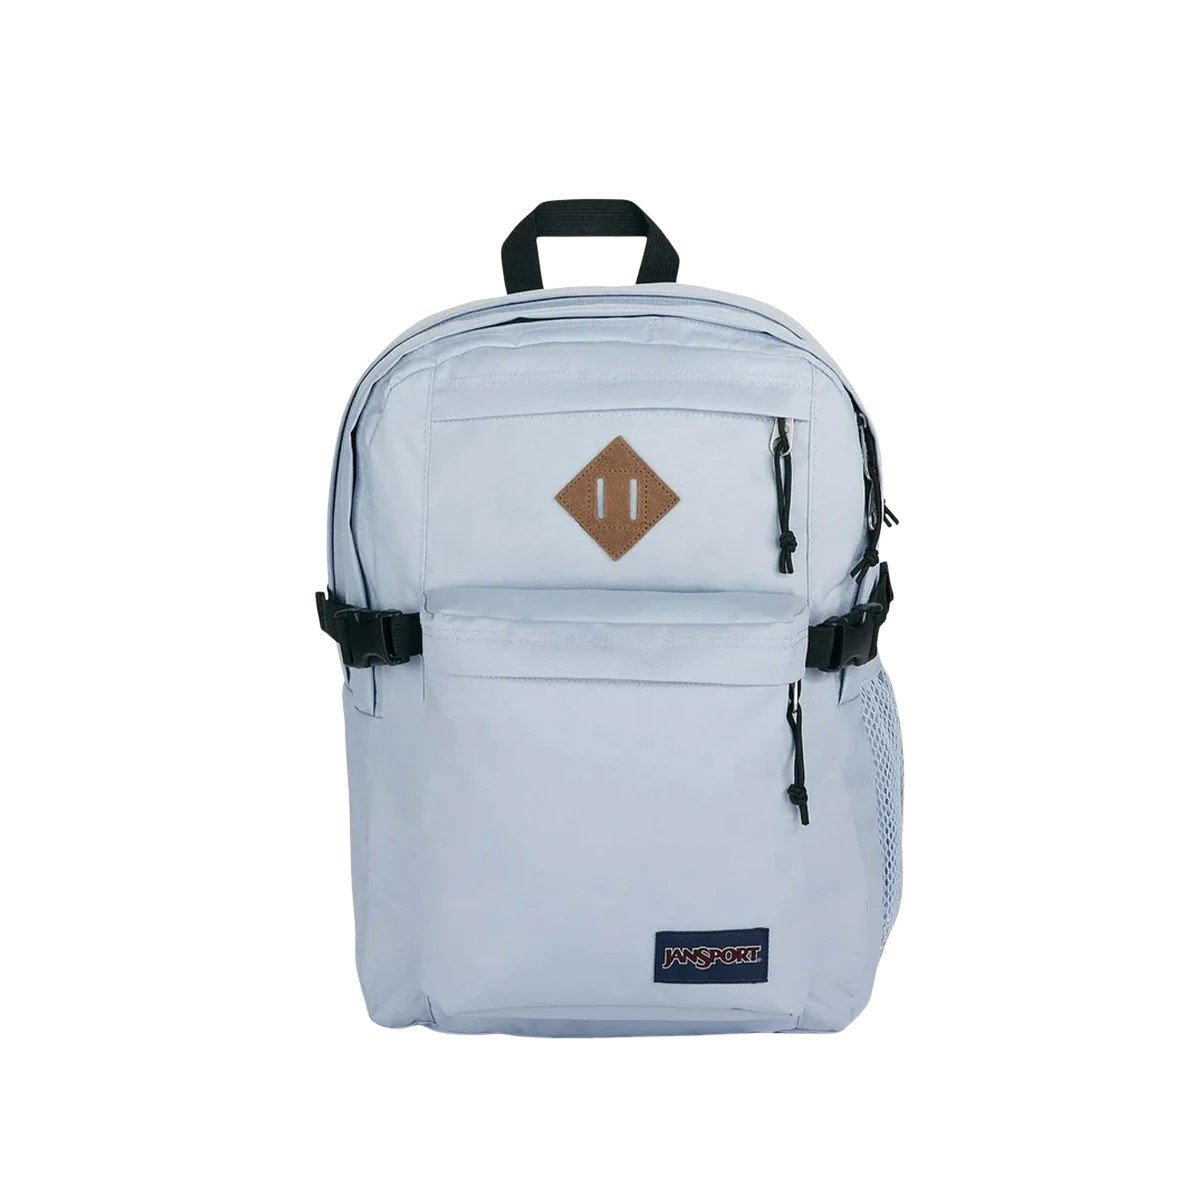 Main Campus Backpack in Blue